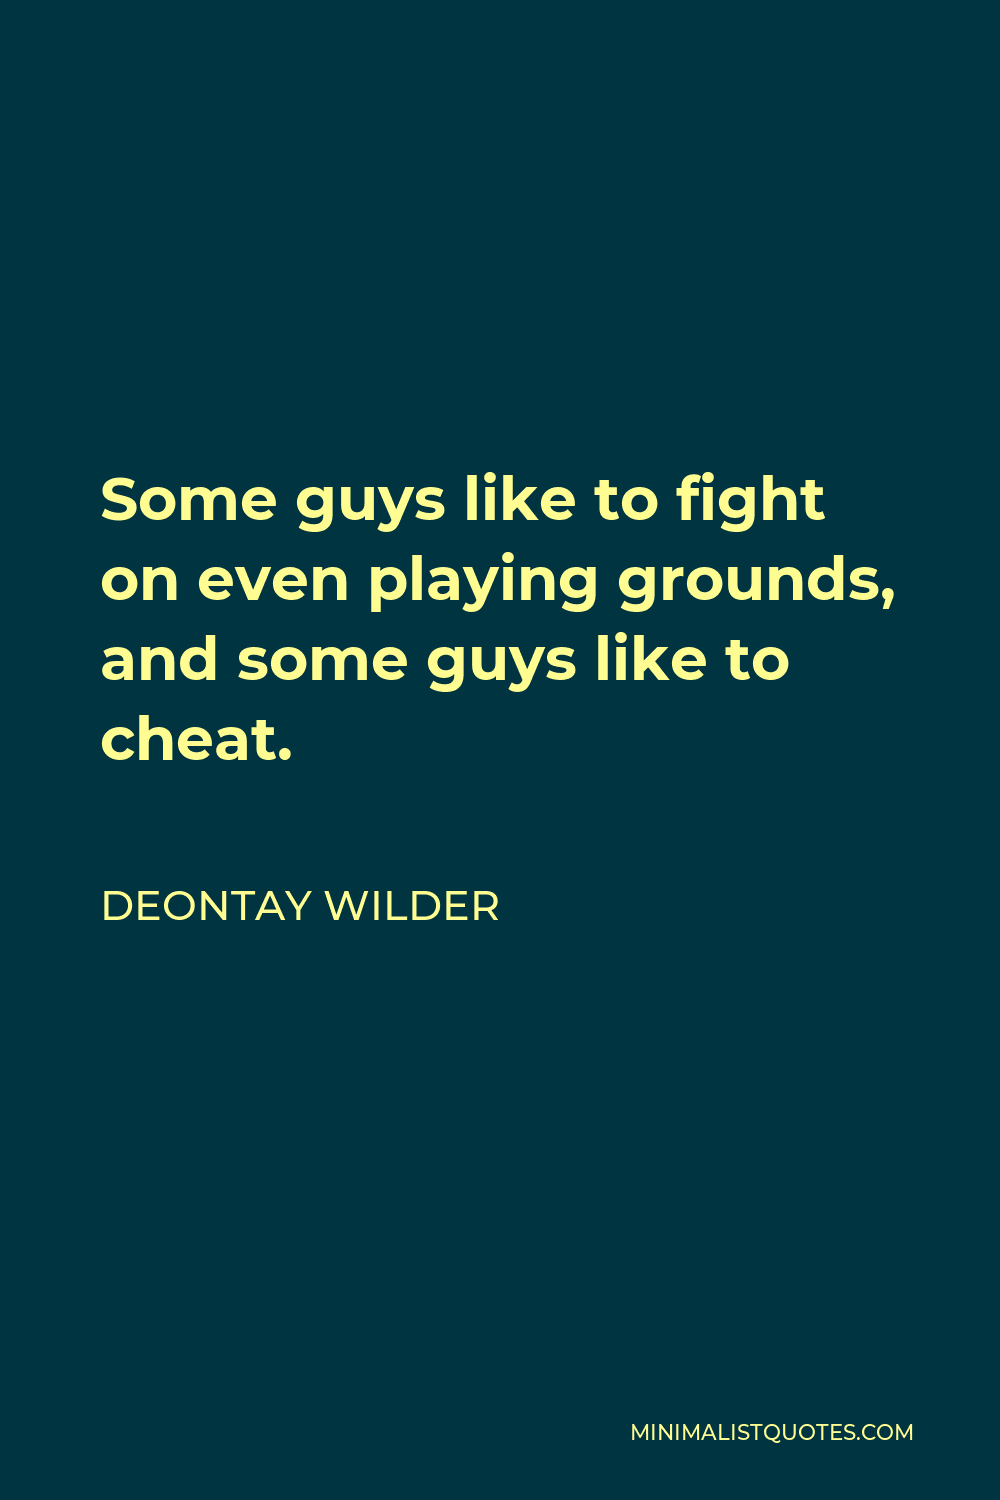 Deontay Wilder Quote - Some guys like to fight on even playing grounds, and some guys like to cheat.